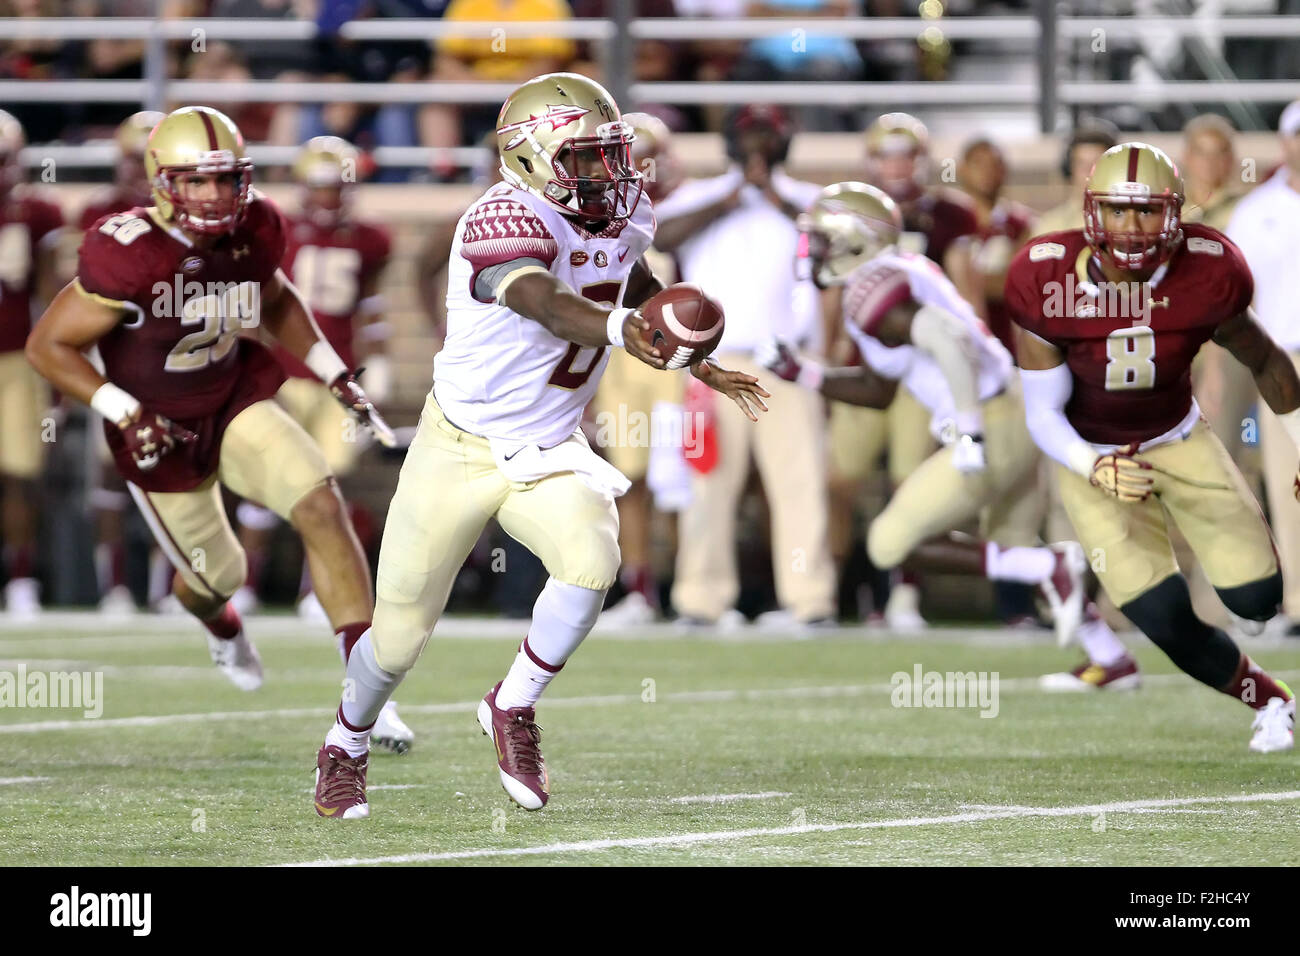 September 18, 2015; Chestnut Hill, MA, USA; Florida State Seminoles quarterback Everett Golson (6) is pursued by Boston College Eagles linebacker Matt Milano (28) and Boston College Eagles defensive lineman Harold Landry (8) during the NCAA football game between the Boston College Eagles and Florida State Seminoles at Alumni Stadium. Florida State defeated Boston College 14-0. Anthony Nesmith/Cal Sport Media Stock Photo